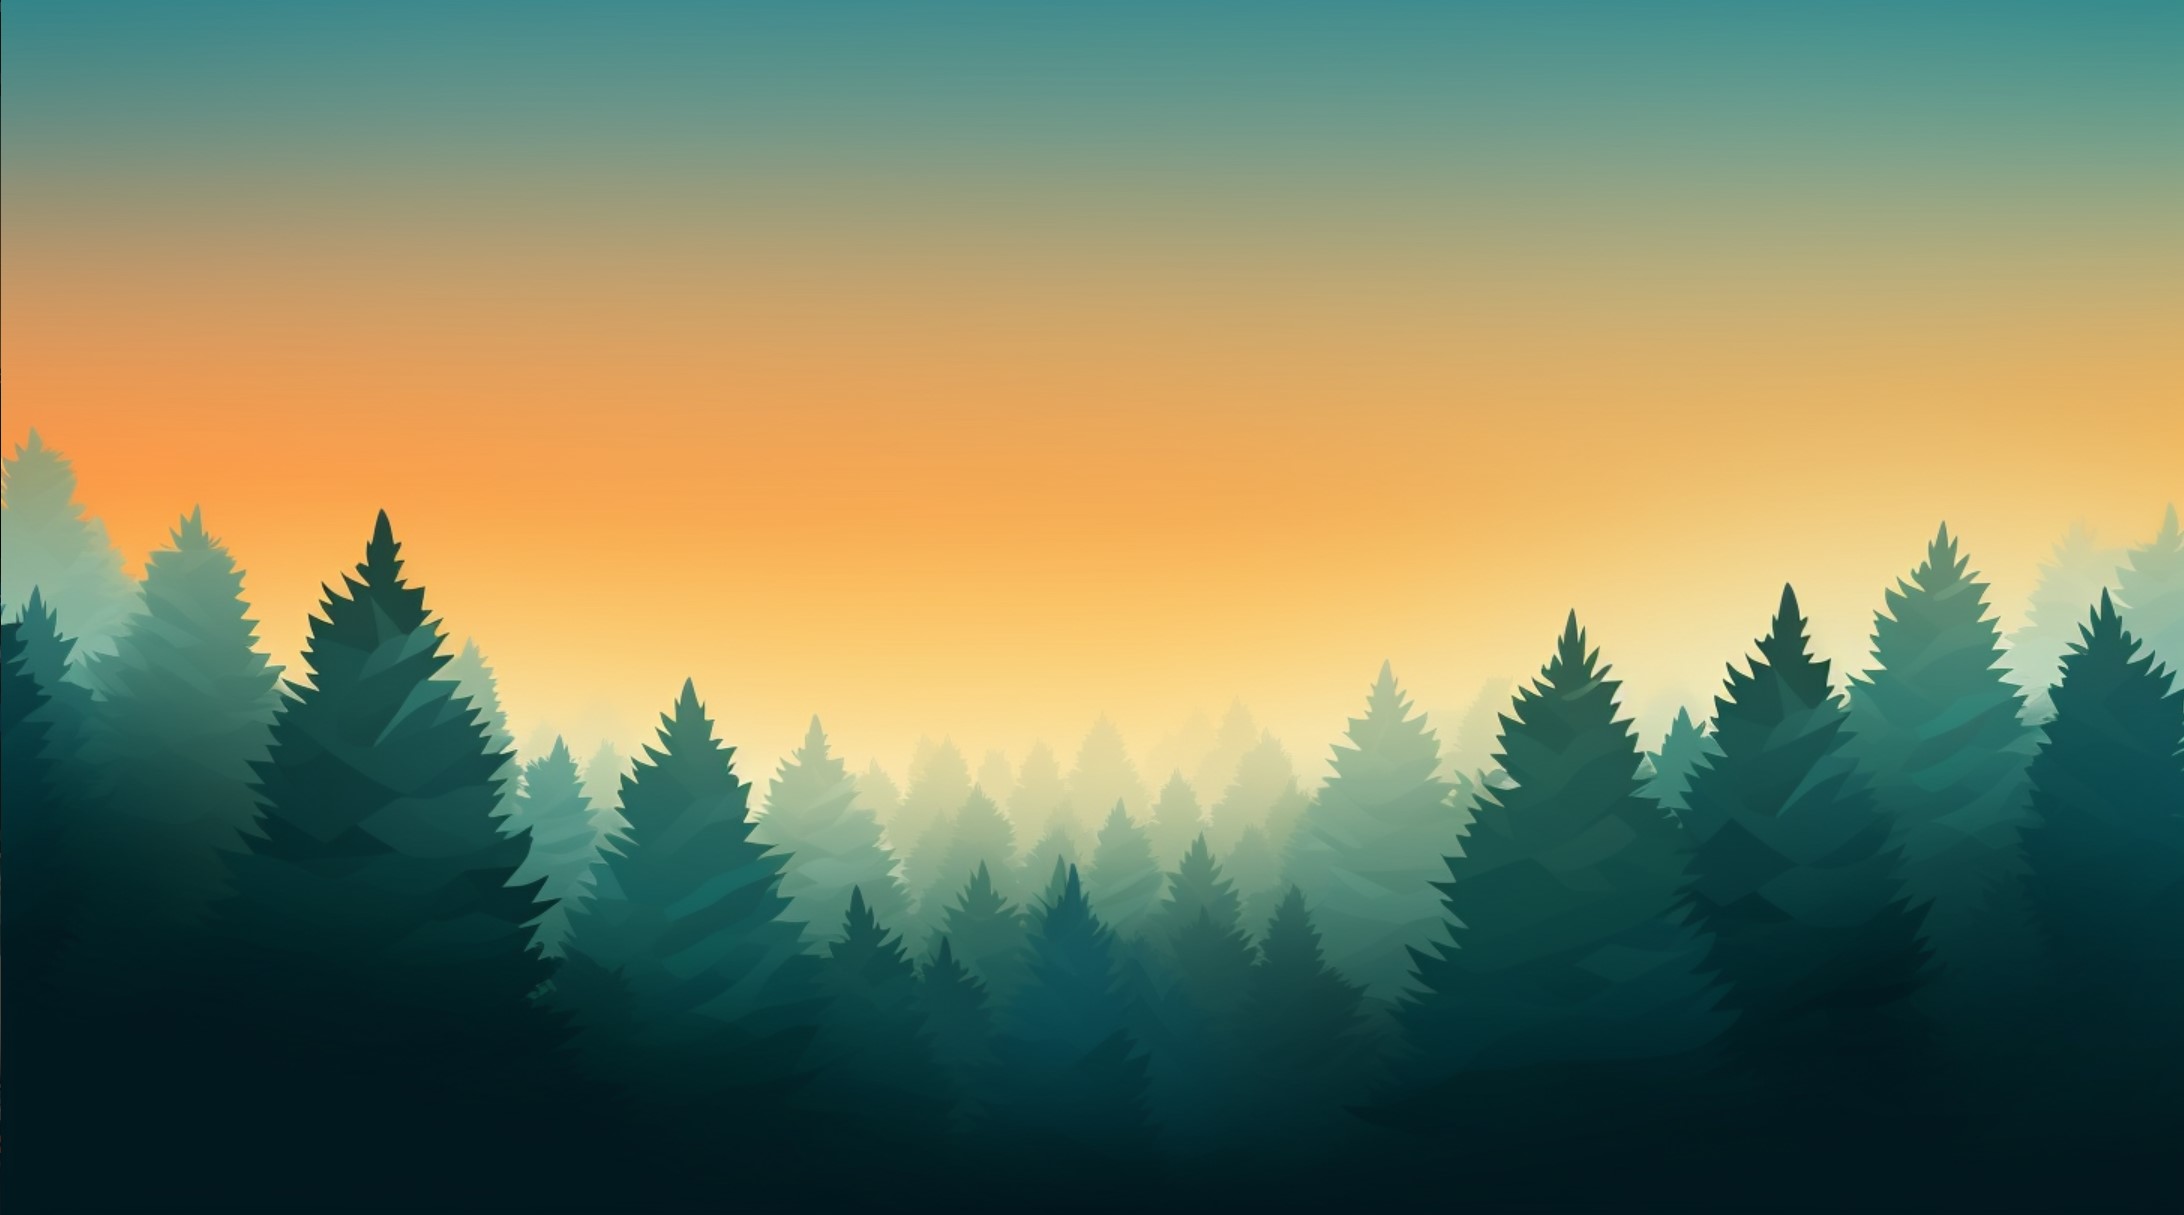 forest of pine trees with sunset in background